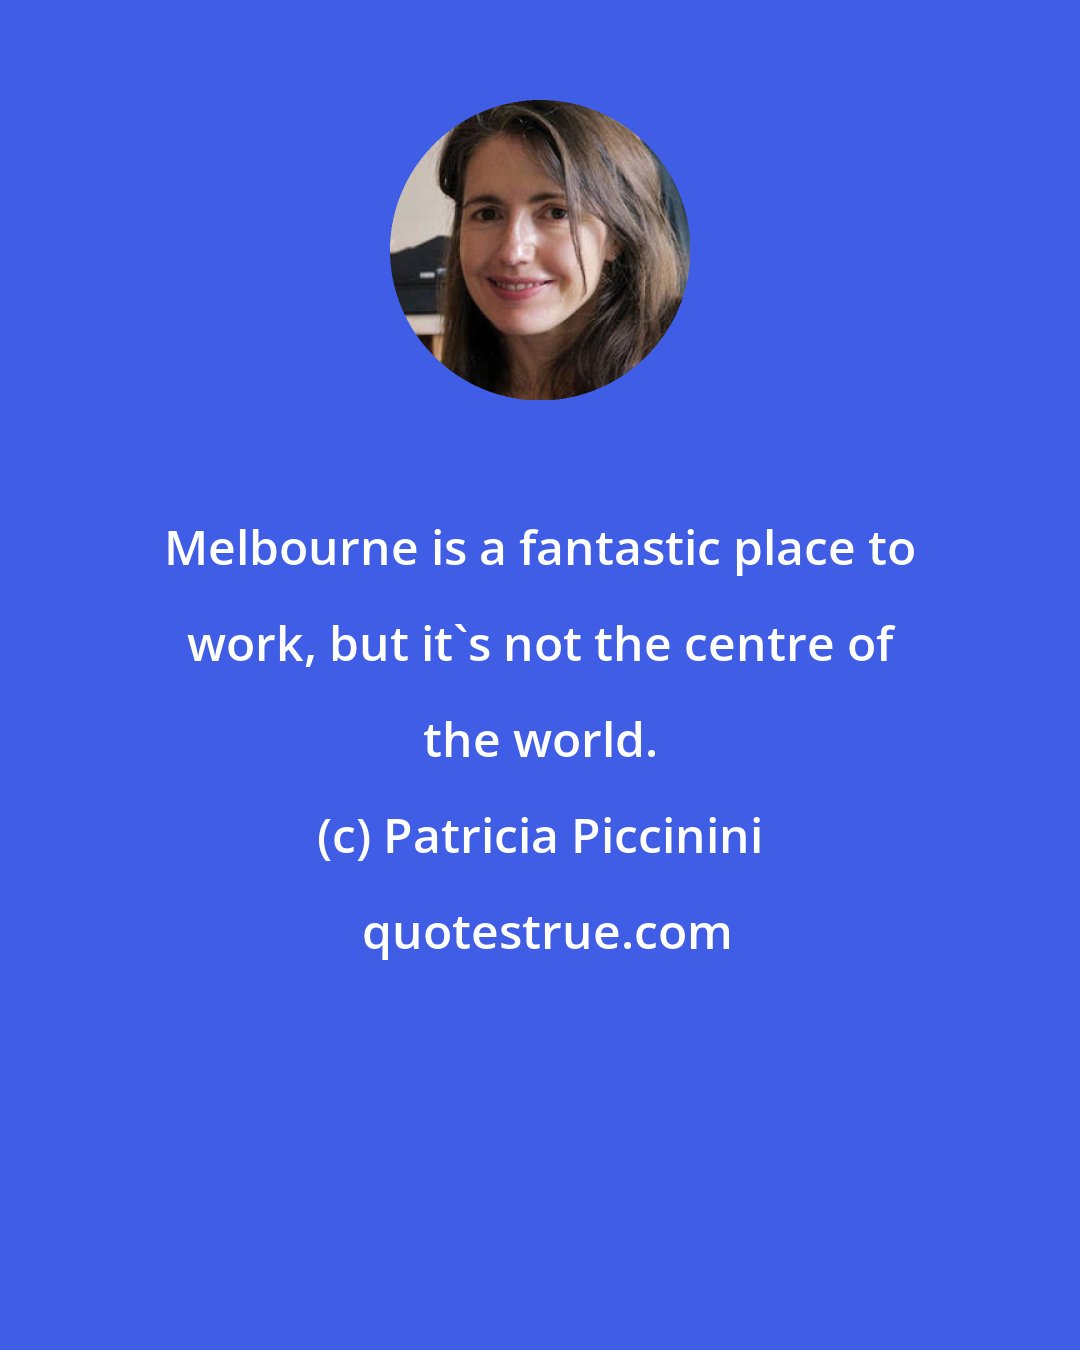 Patricia Piccinini: Melbourne is a fantastic place to work, but it's not the centre of the world.